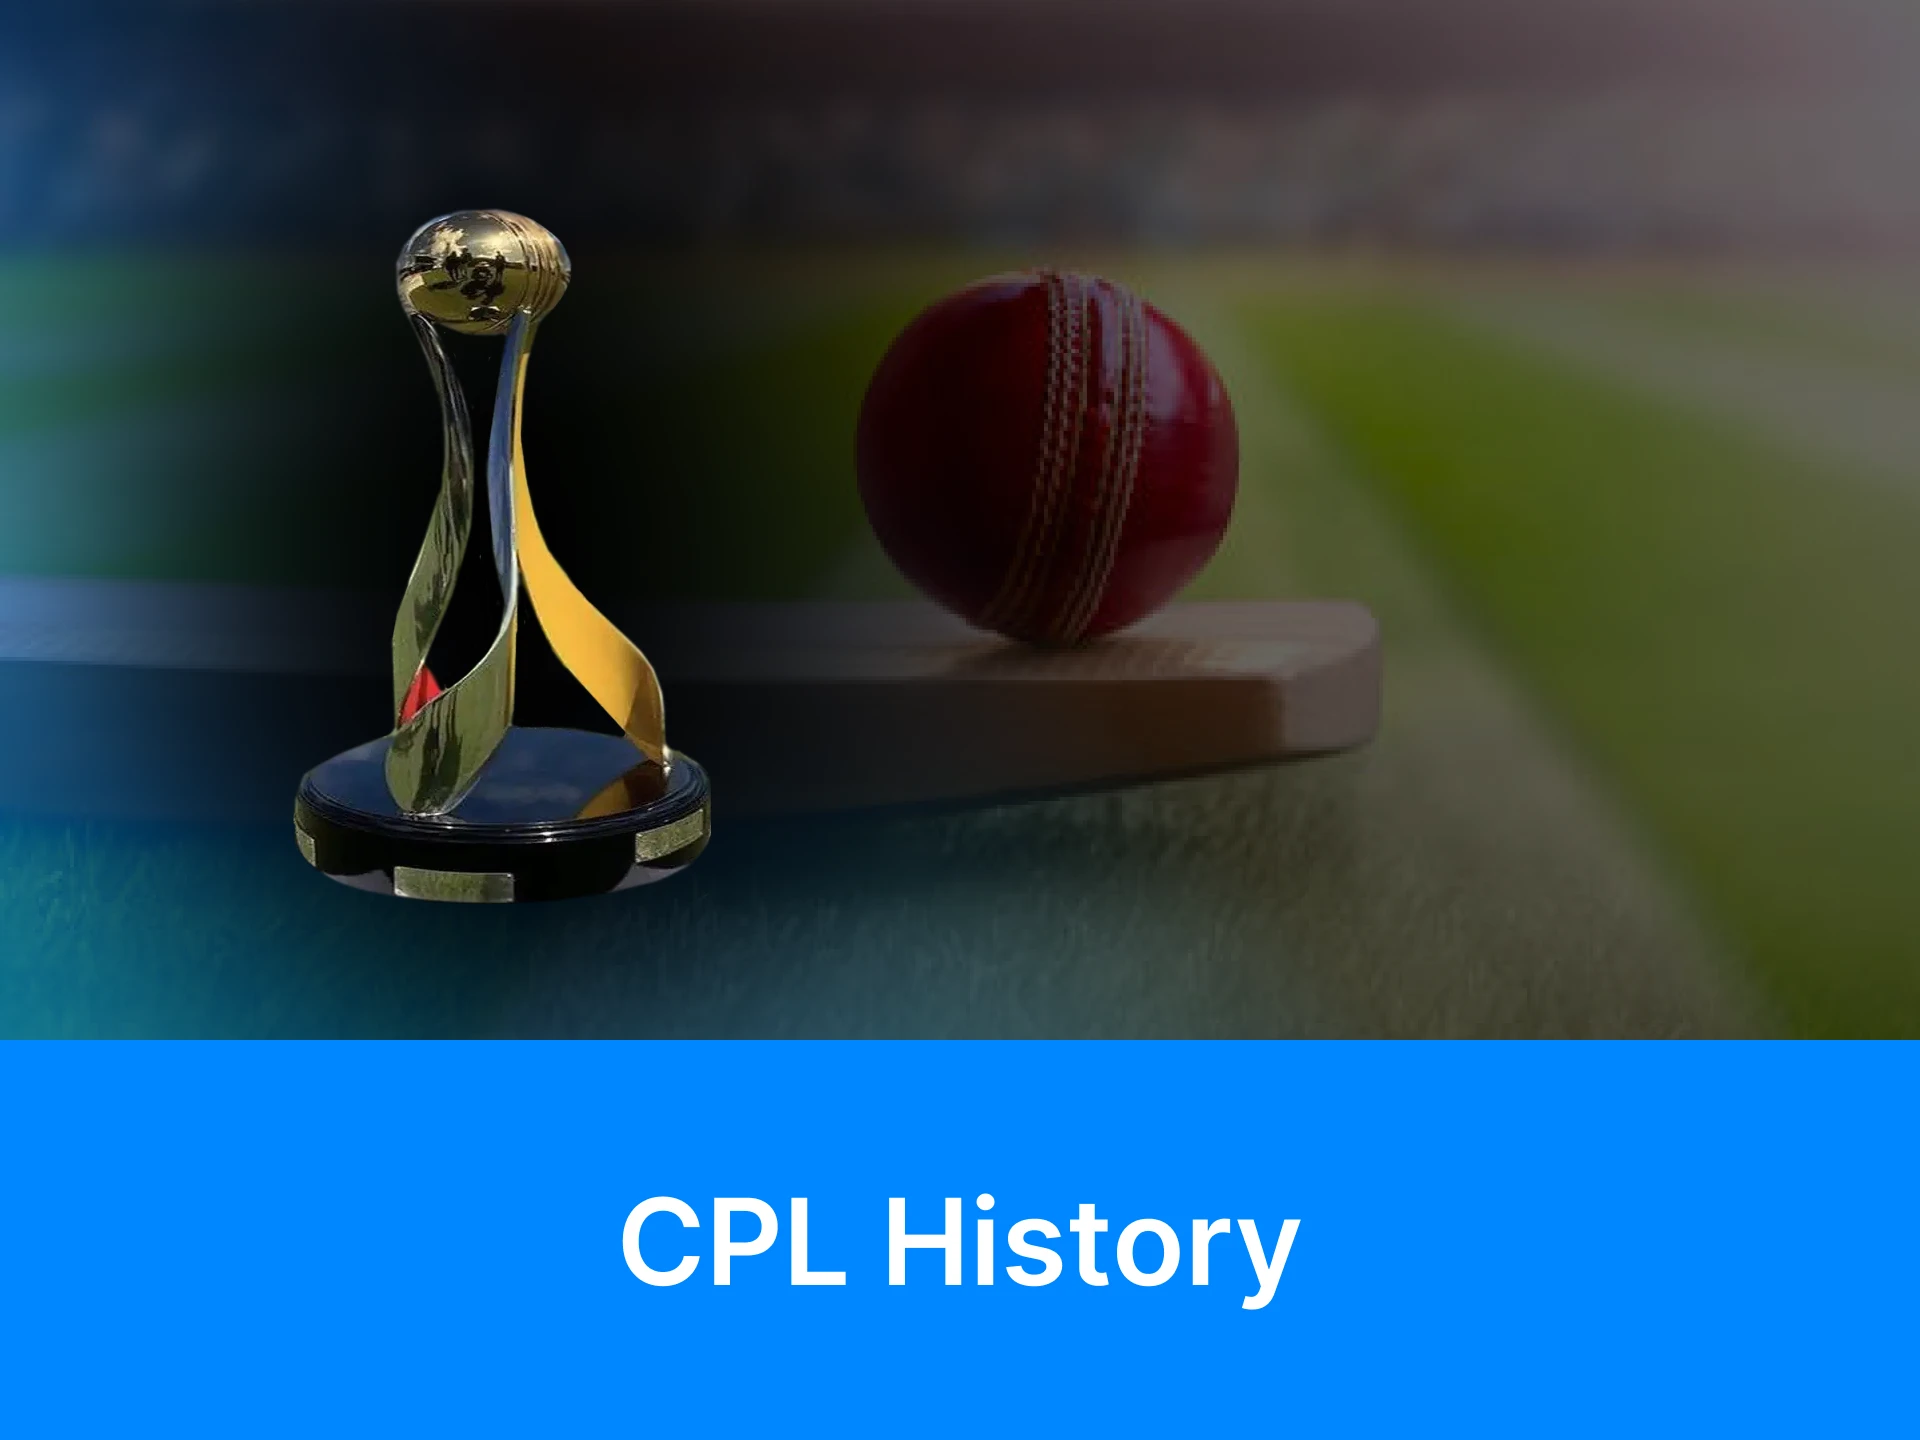 The first CPL was held in 2013.